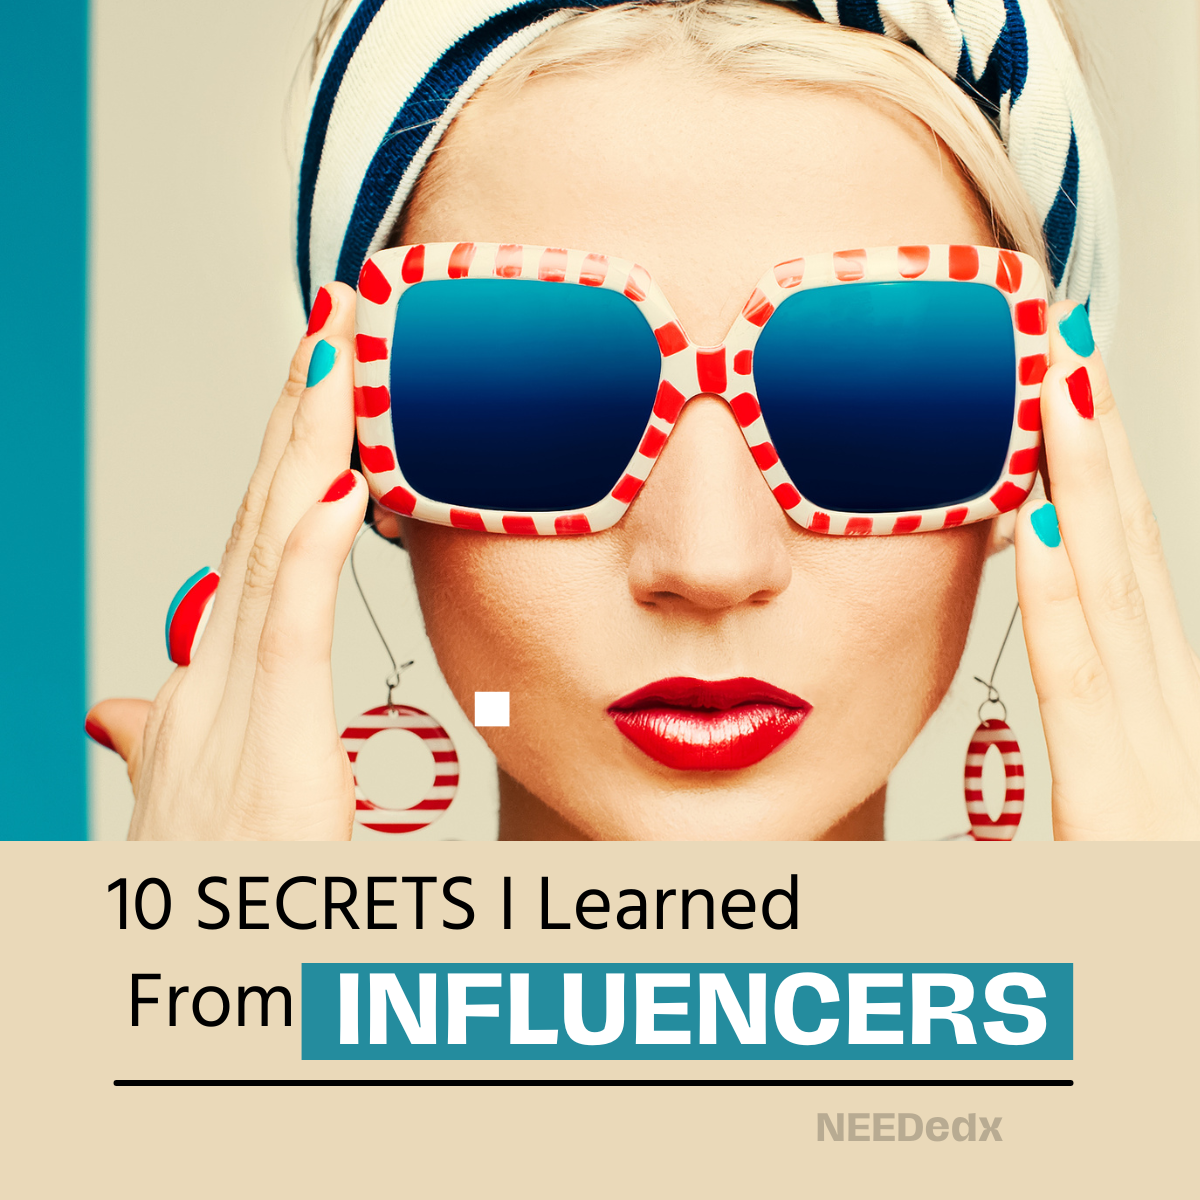 10 SECRETS I Learned From INFLUENCERS